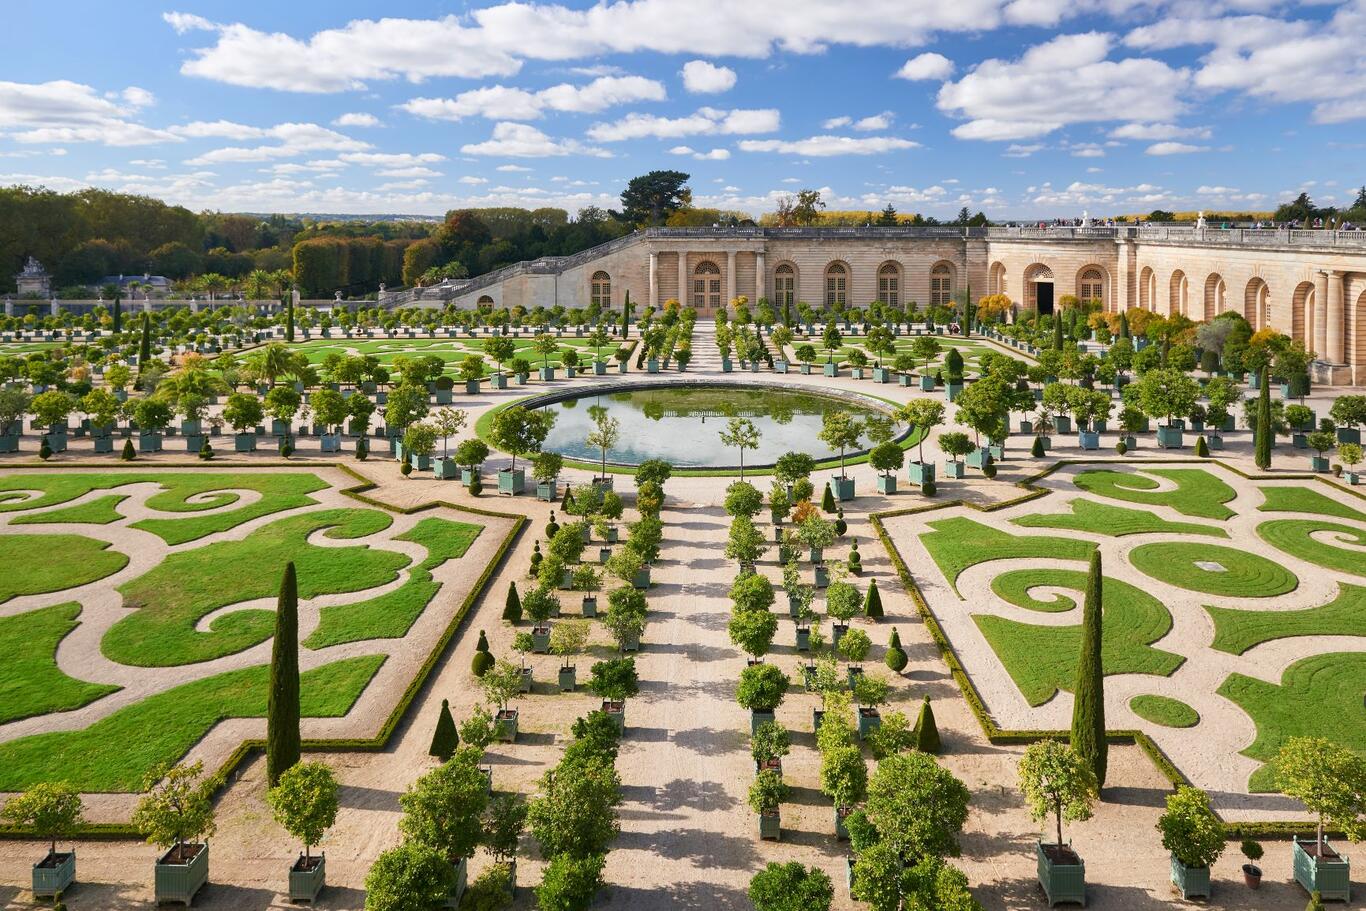 A photograph of the courtyard gardens at Chateau Versailles.